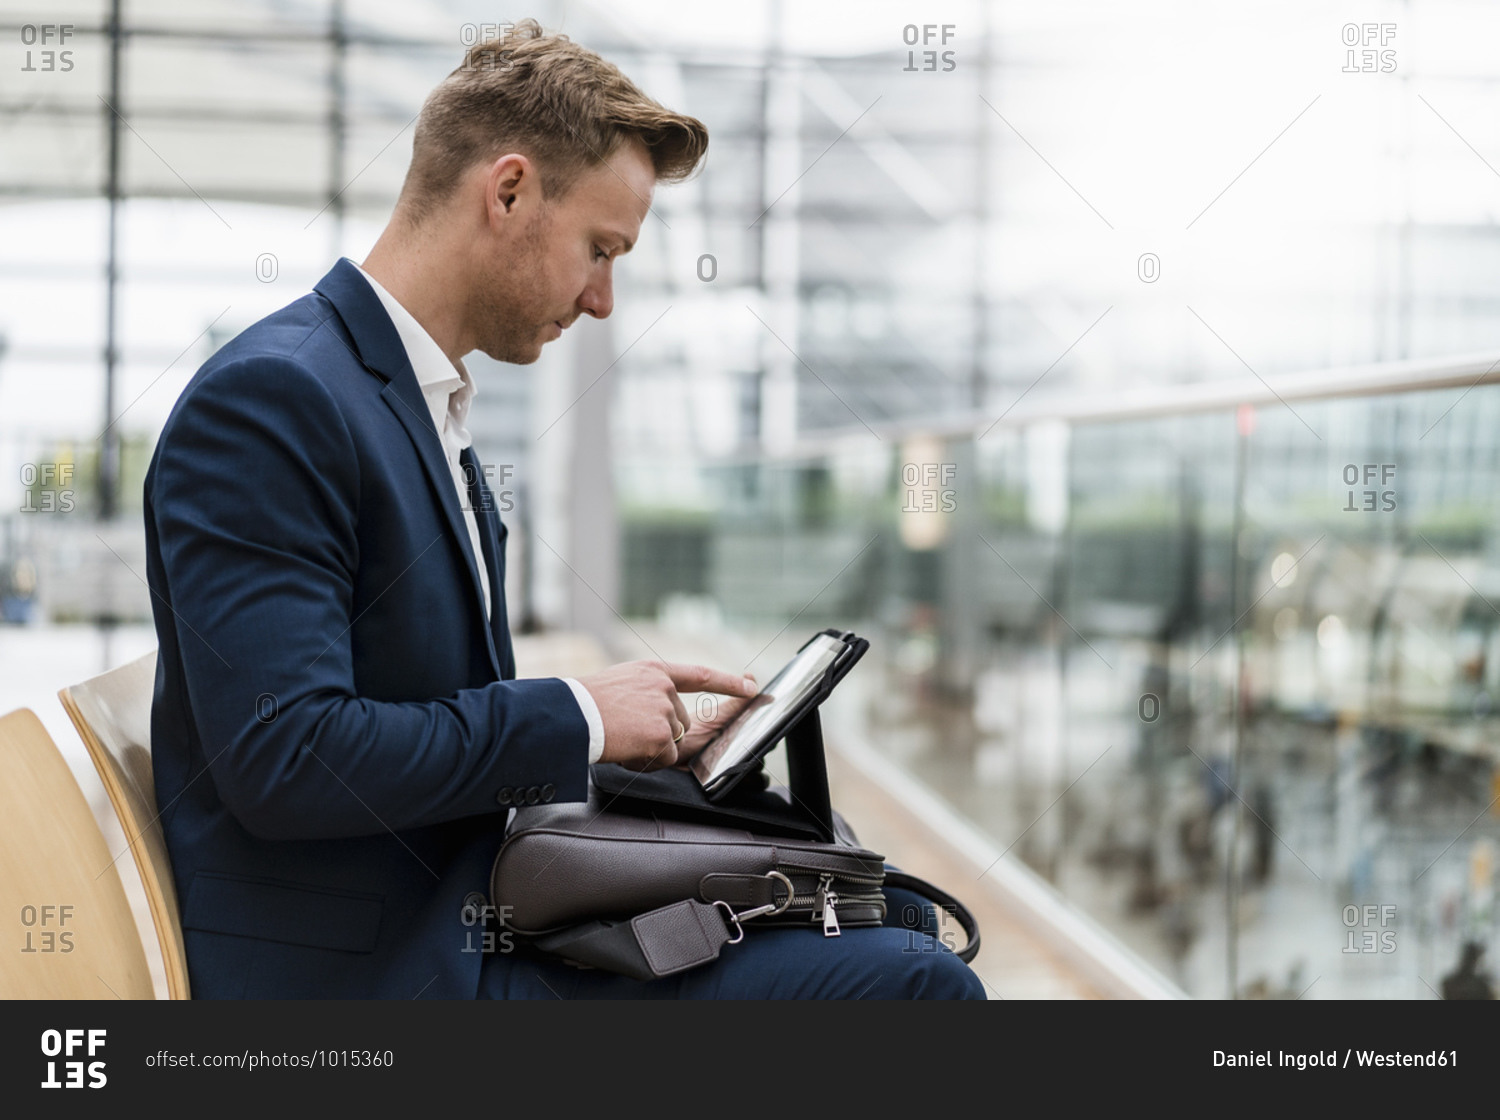 Businessman with bag using digital tablet while sitting in city